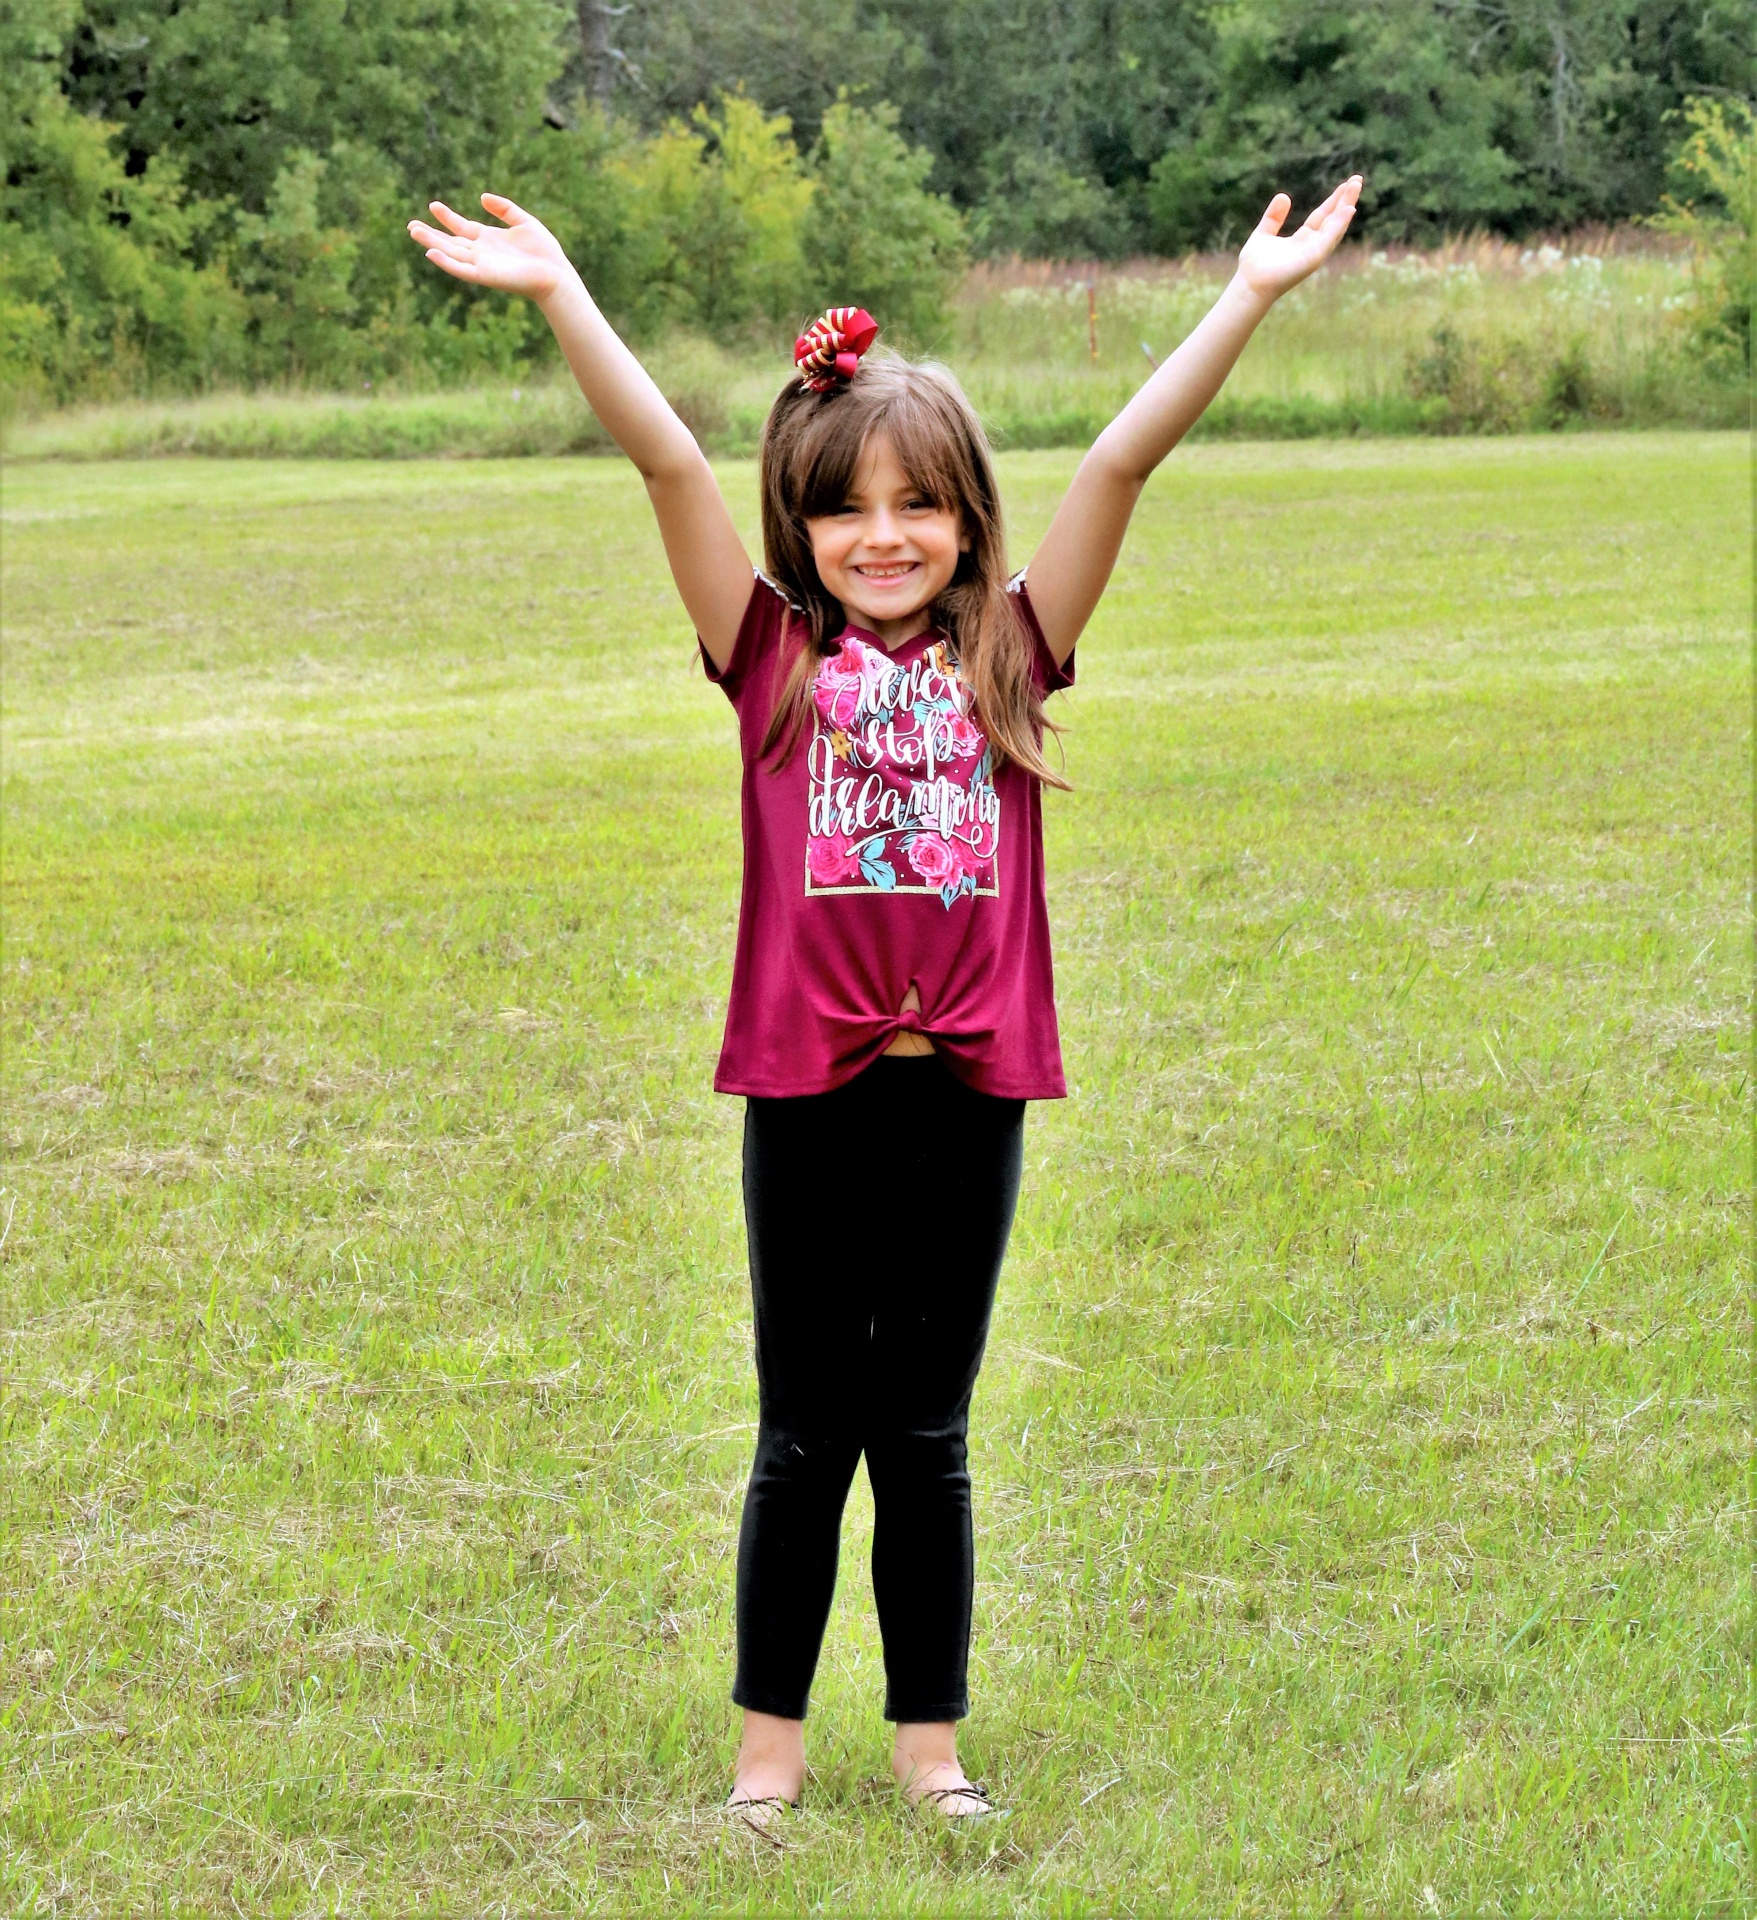 A cute smiling little girl is standing in a green country field with her arms spread out over her head.